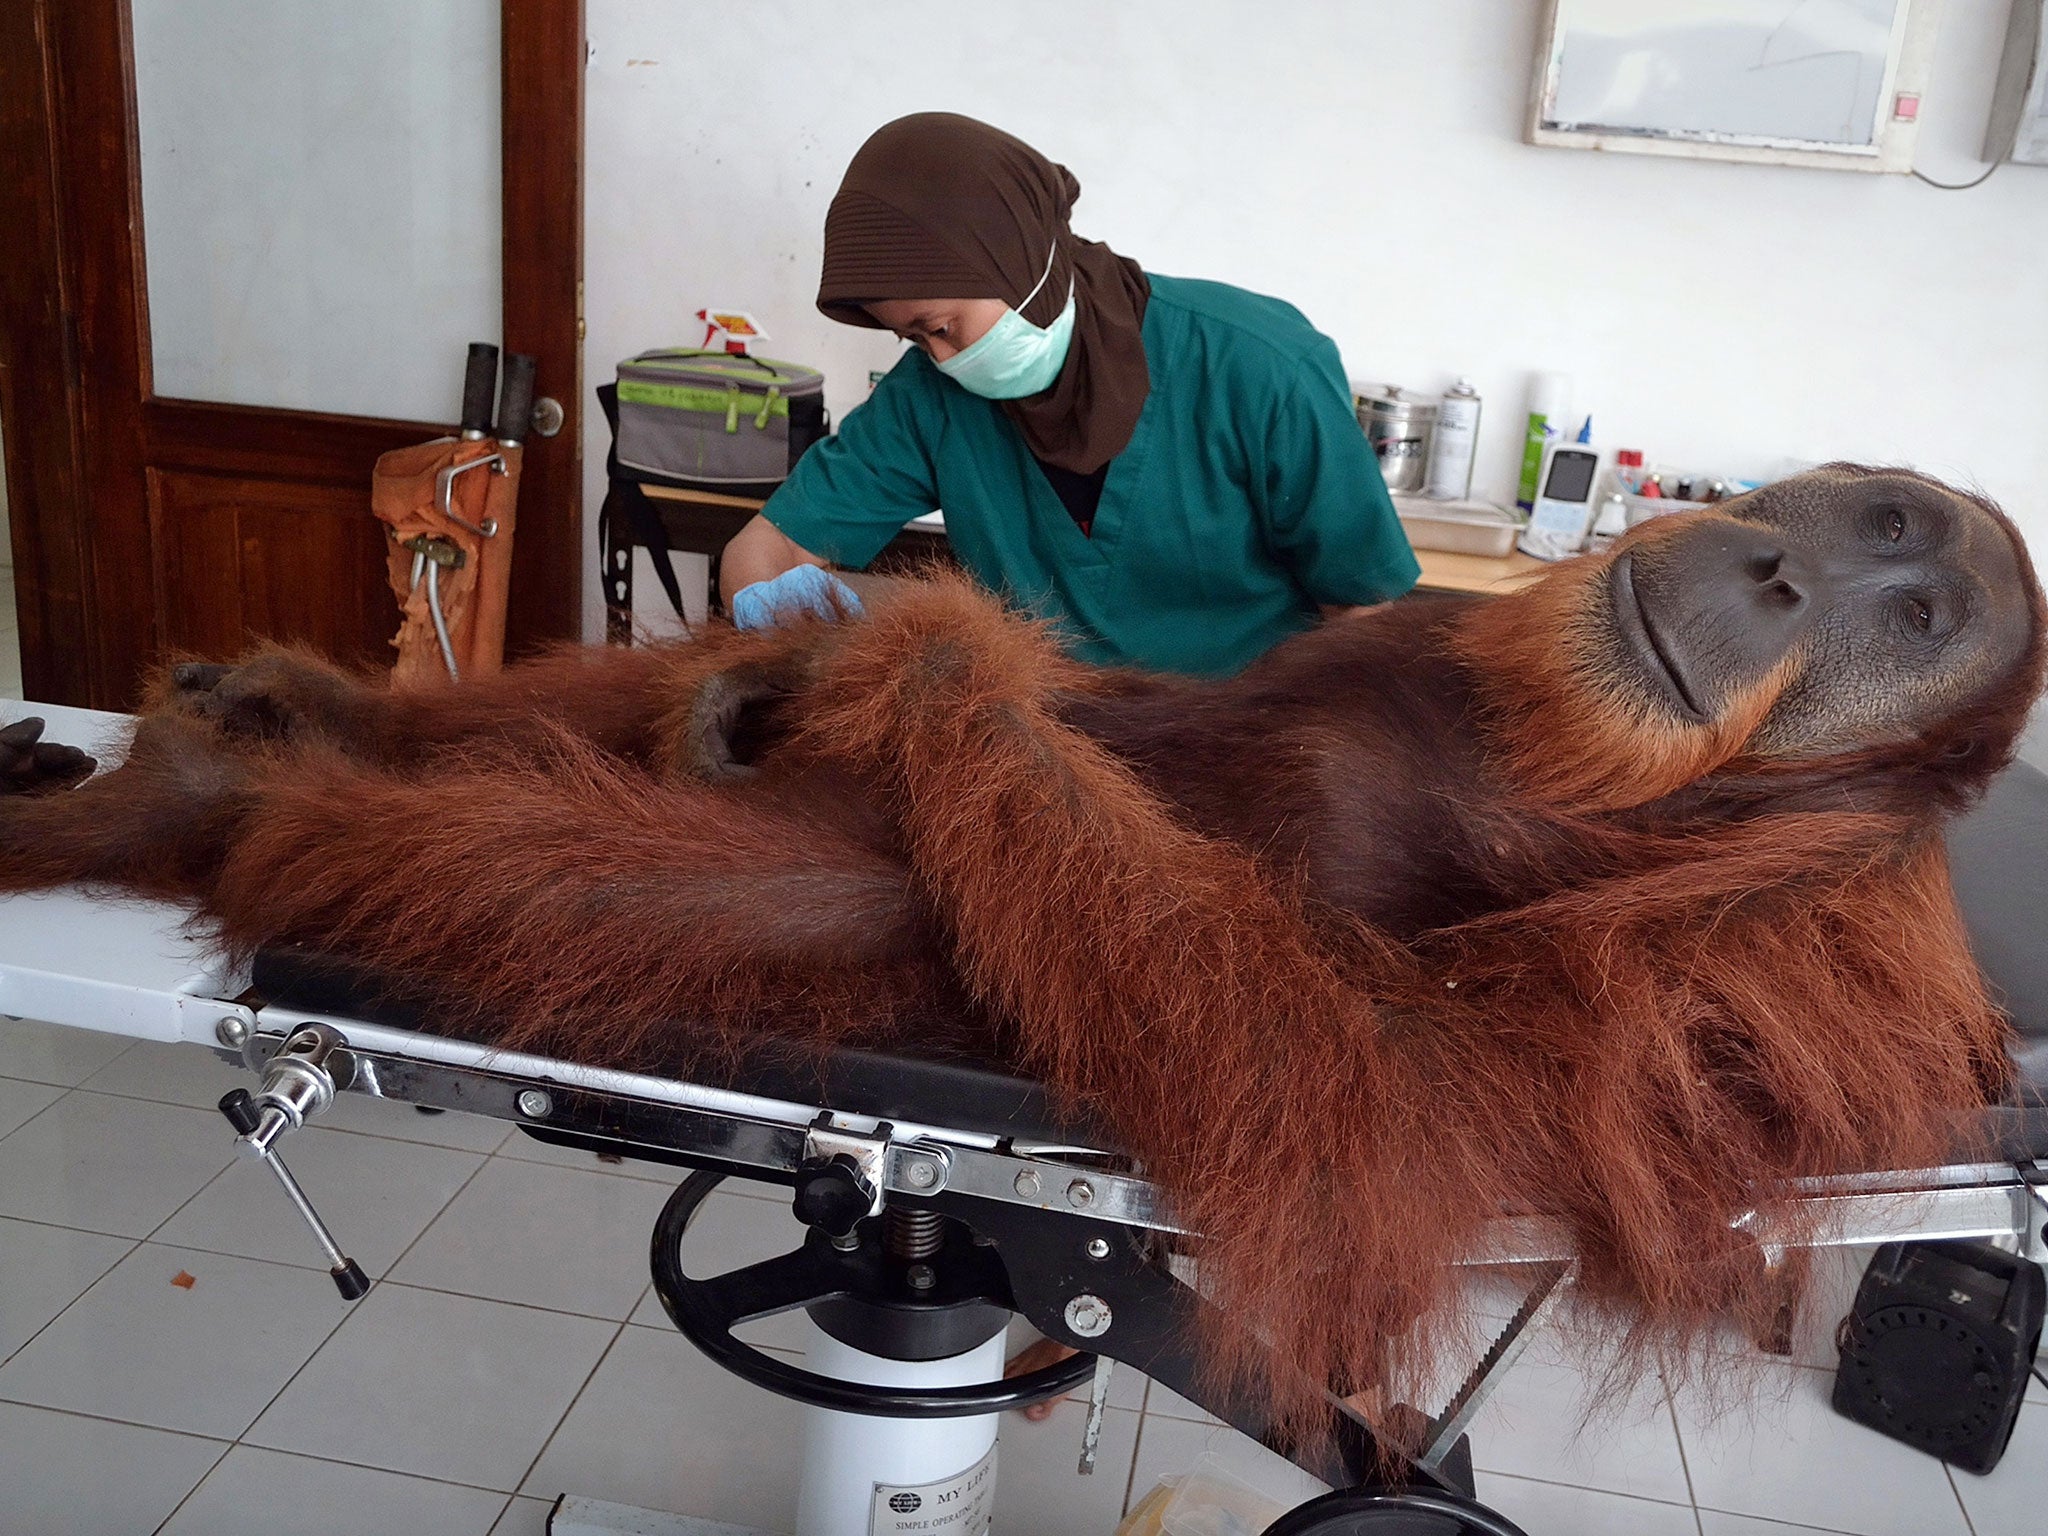 A veterinary staff member conducts medical examinations on a 14-year-old male orangutan